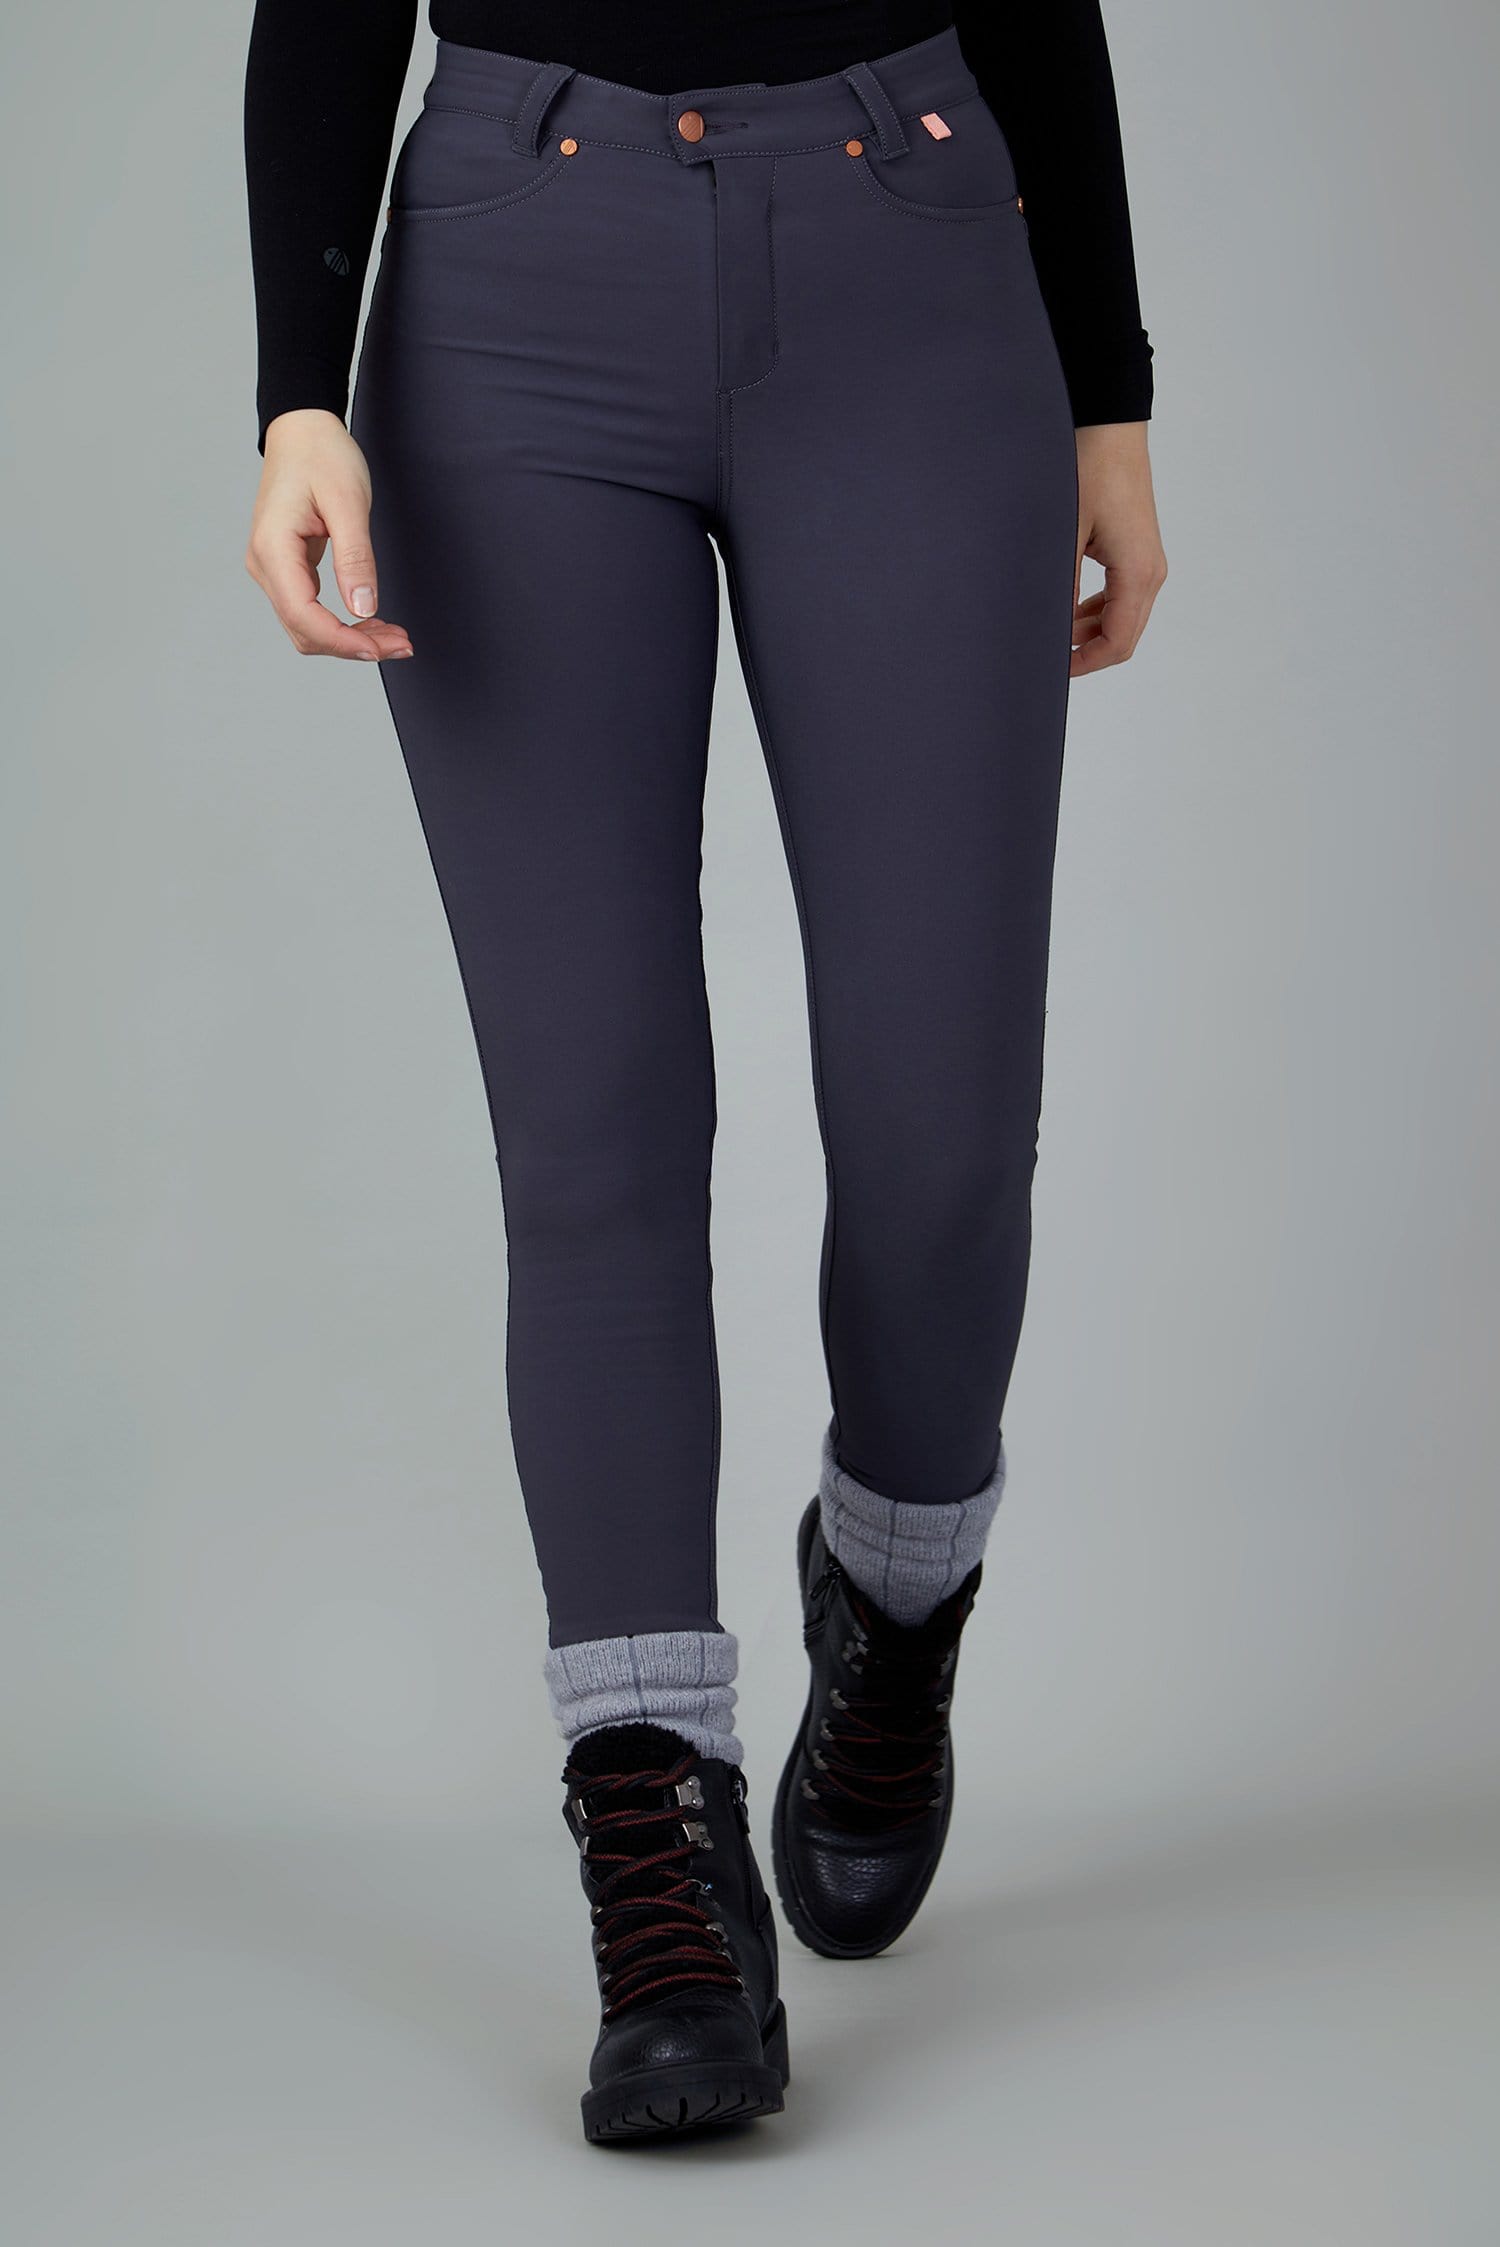 The Aventurite Stretch Skinny Outdoor Trousers - Obsidian - 26l / Uk8 - Womens - Acai Outdoorwear